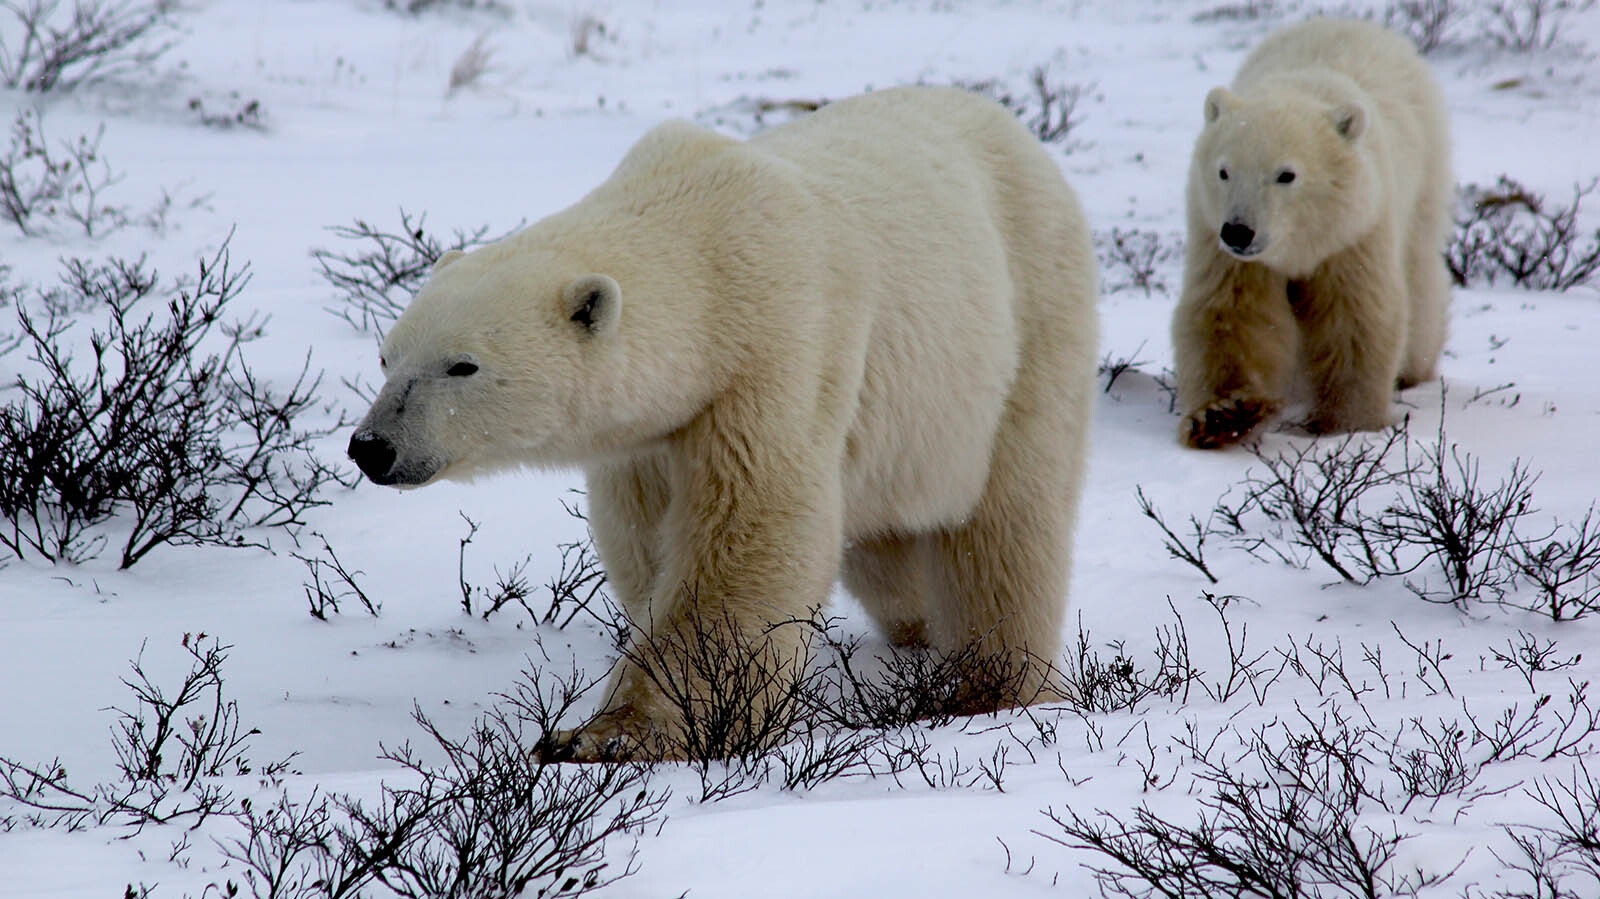 The polar bears who live around the edge of Hudson Bay east of Churchill, Manitoba, Canada, are used to people being around watching them.